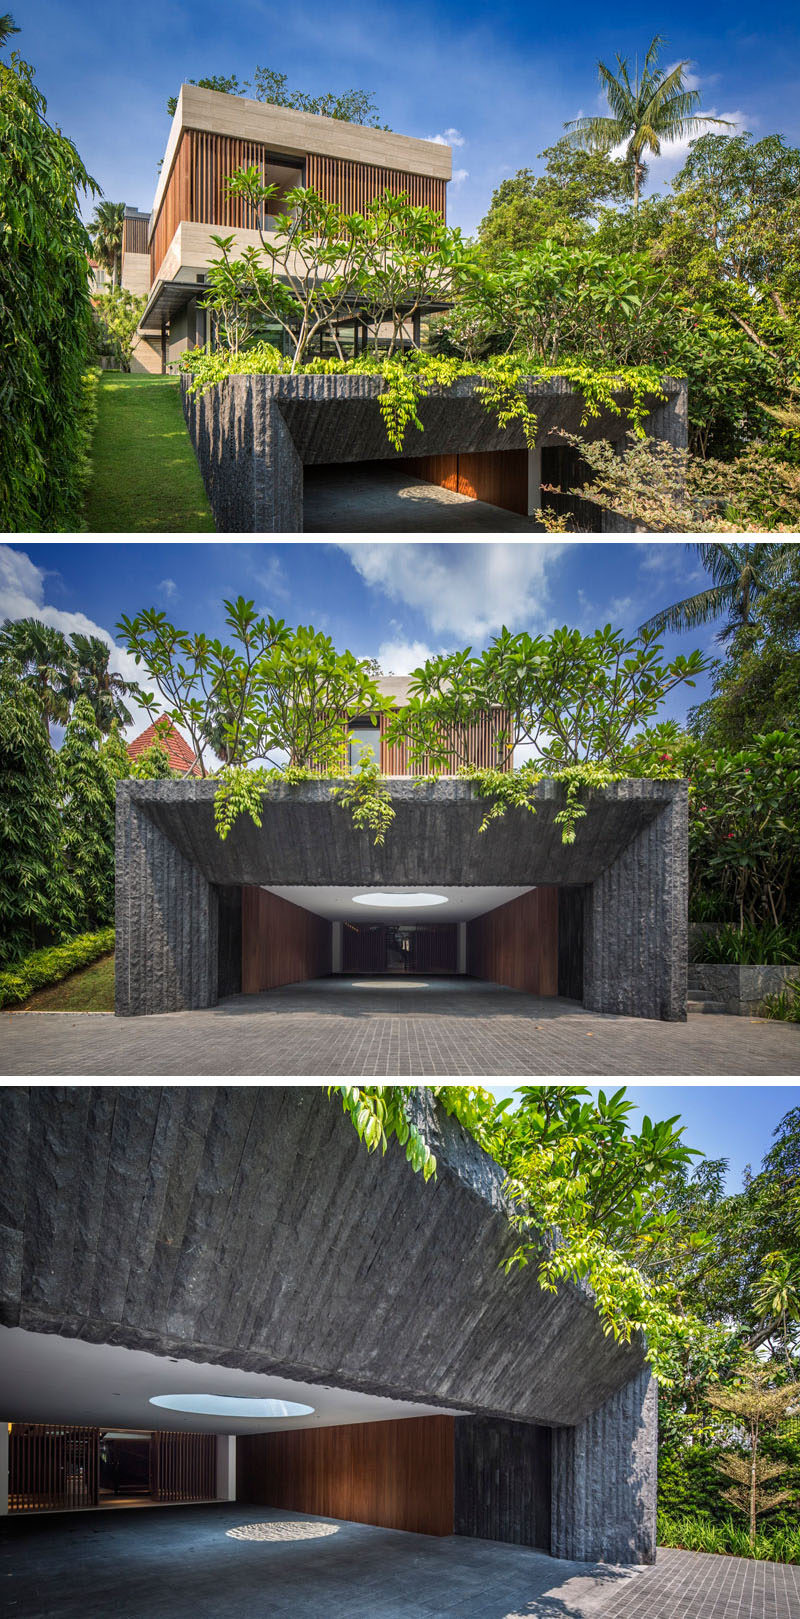 Upon entering through the front gate of this Singaporean home, a cave-like entrance guides to into the home.